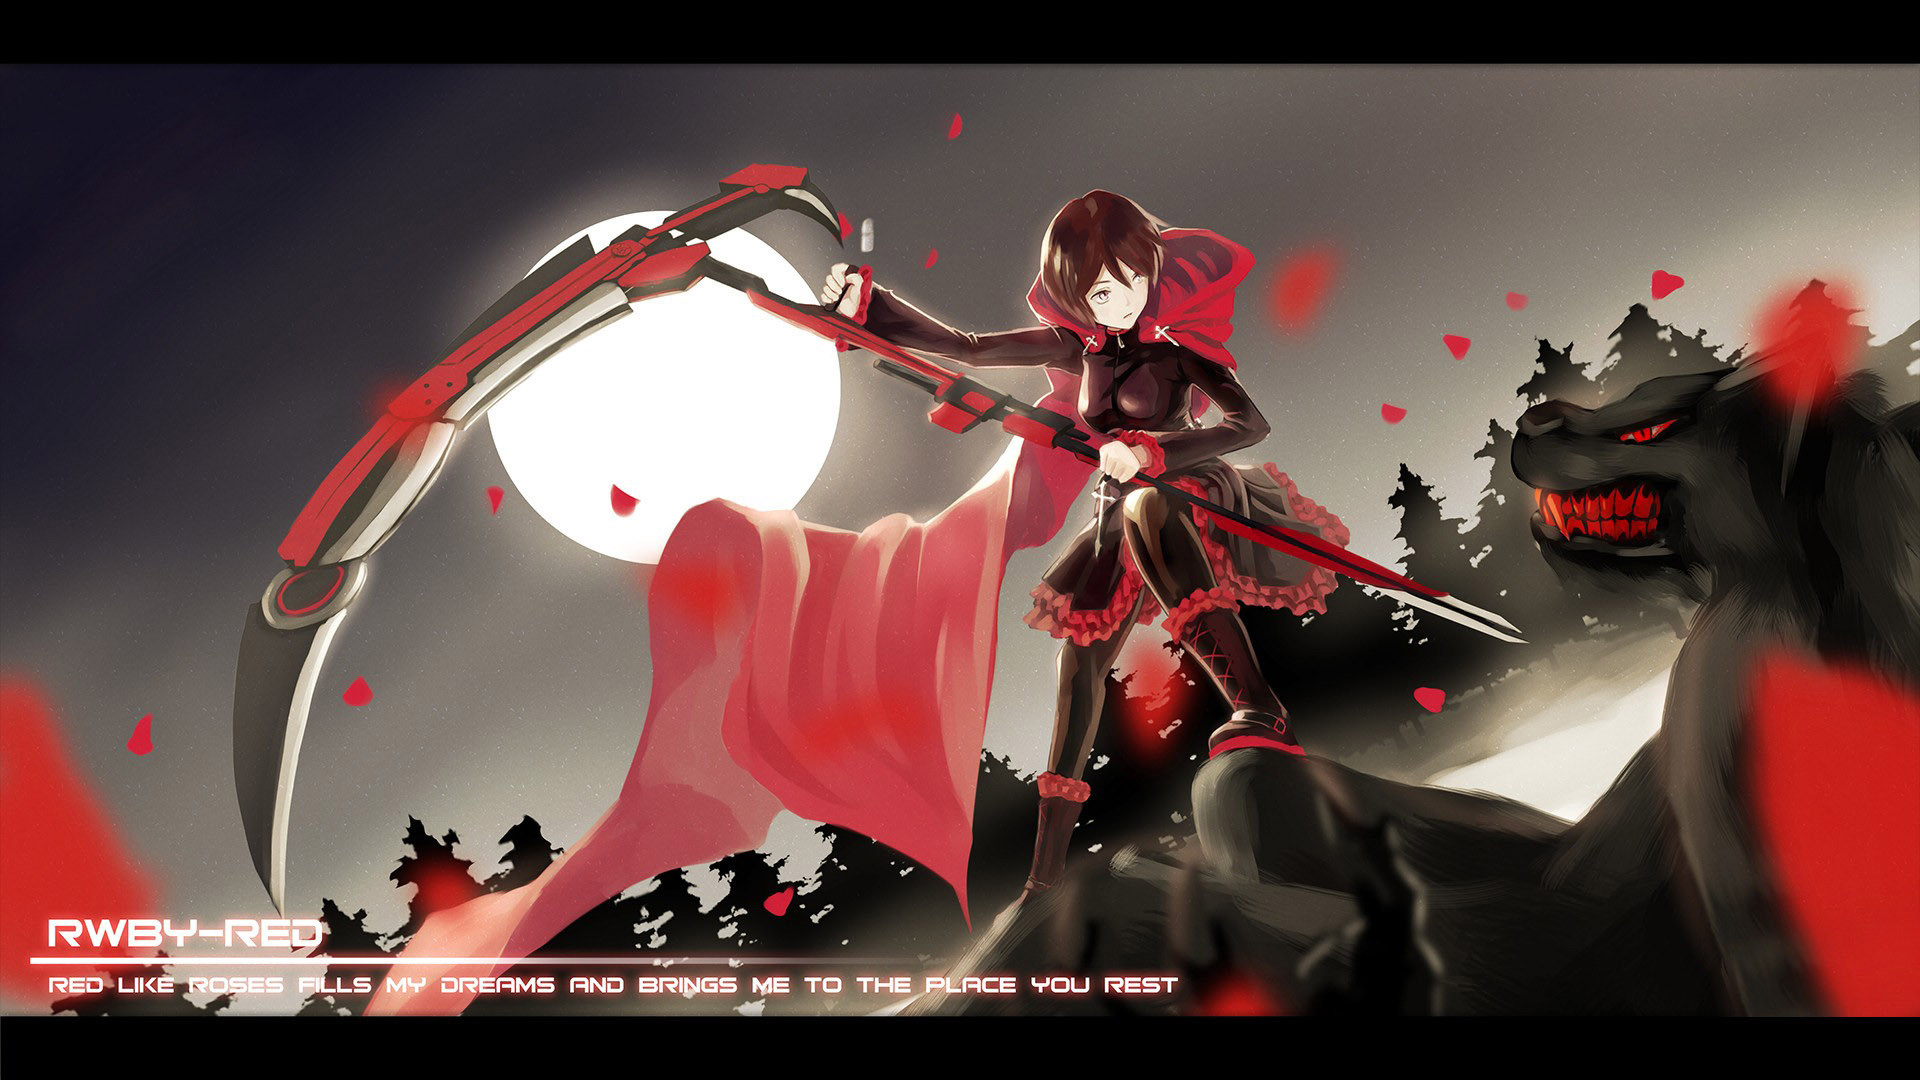 Ruby Rose RWBY wallpapers 24 Wallpapers